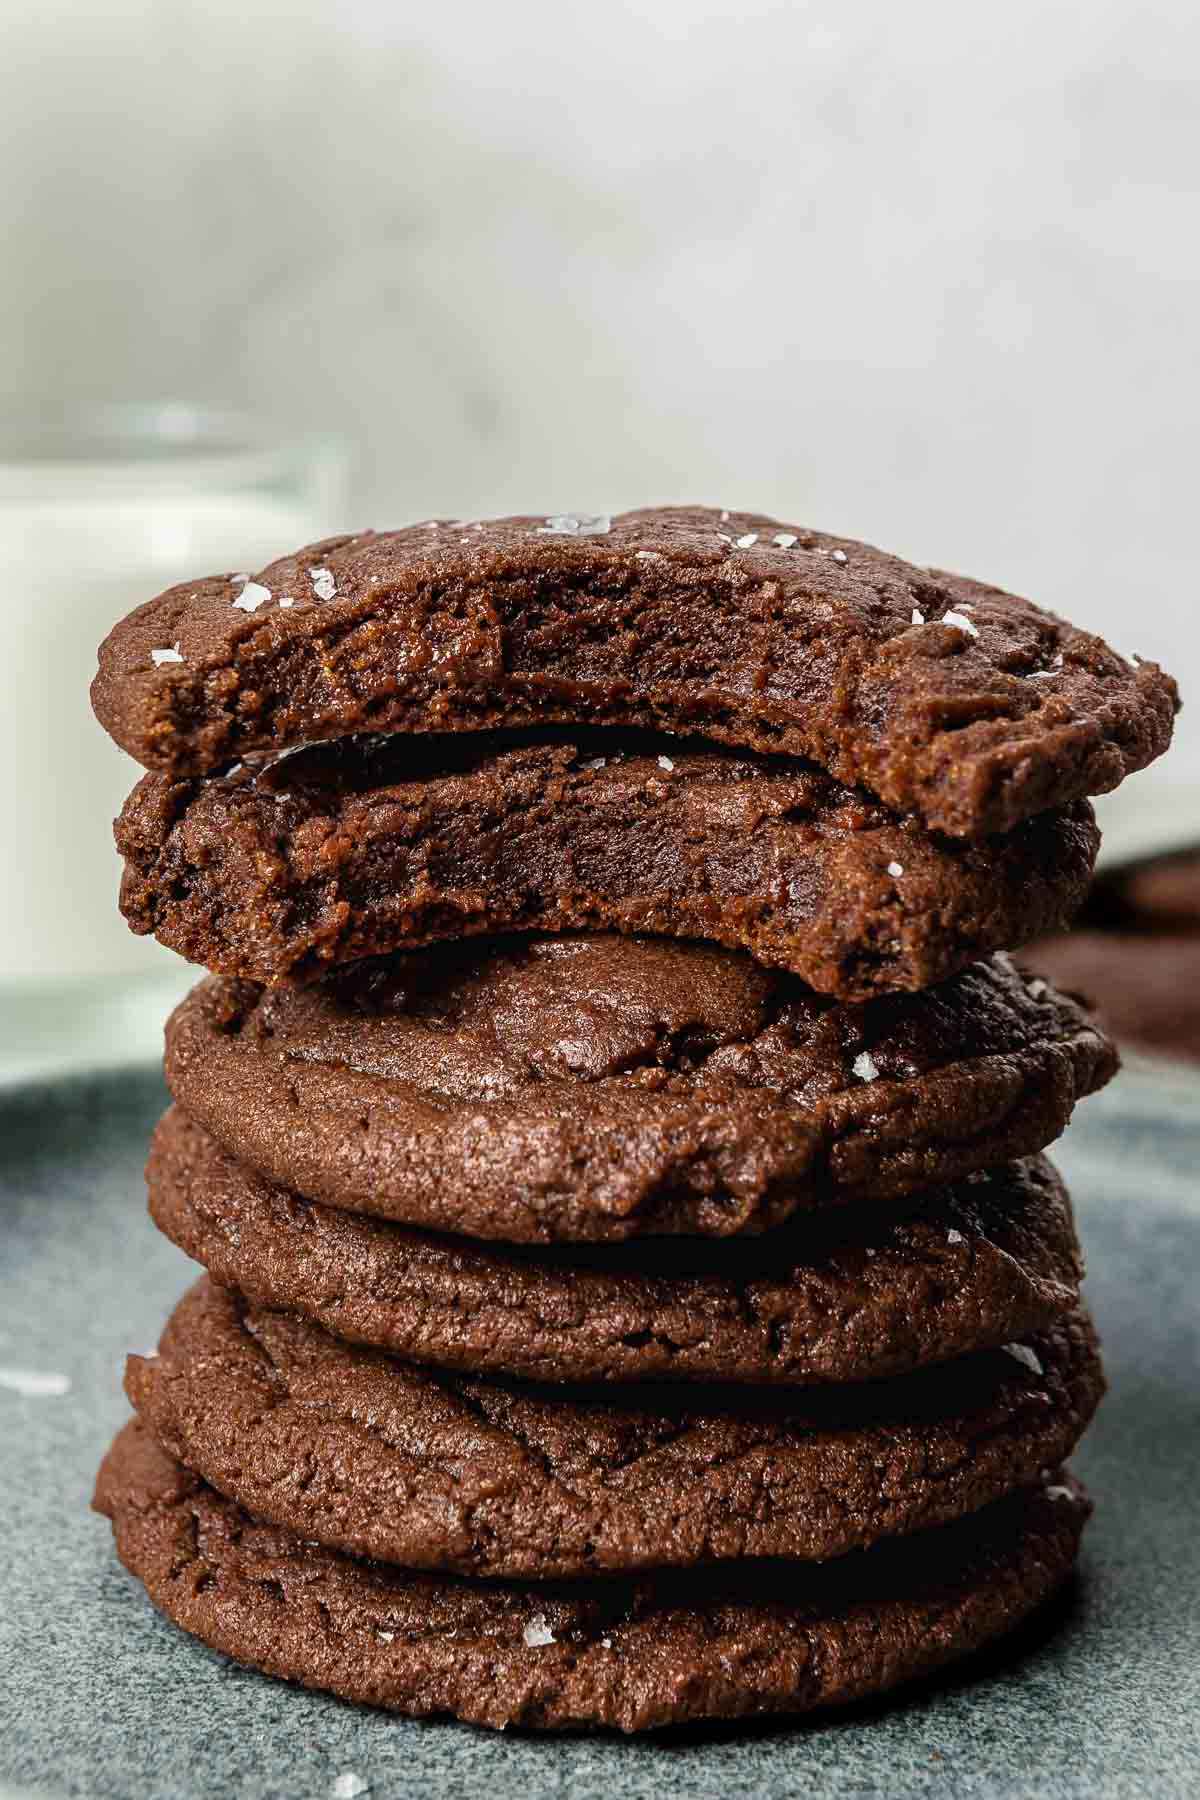 Six chocolate cookies stacked.